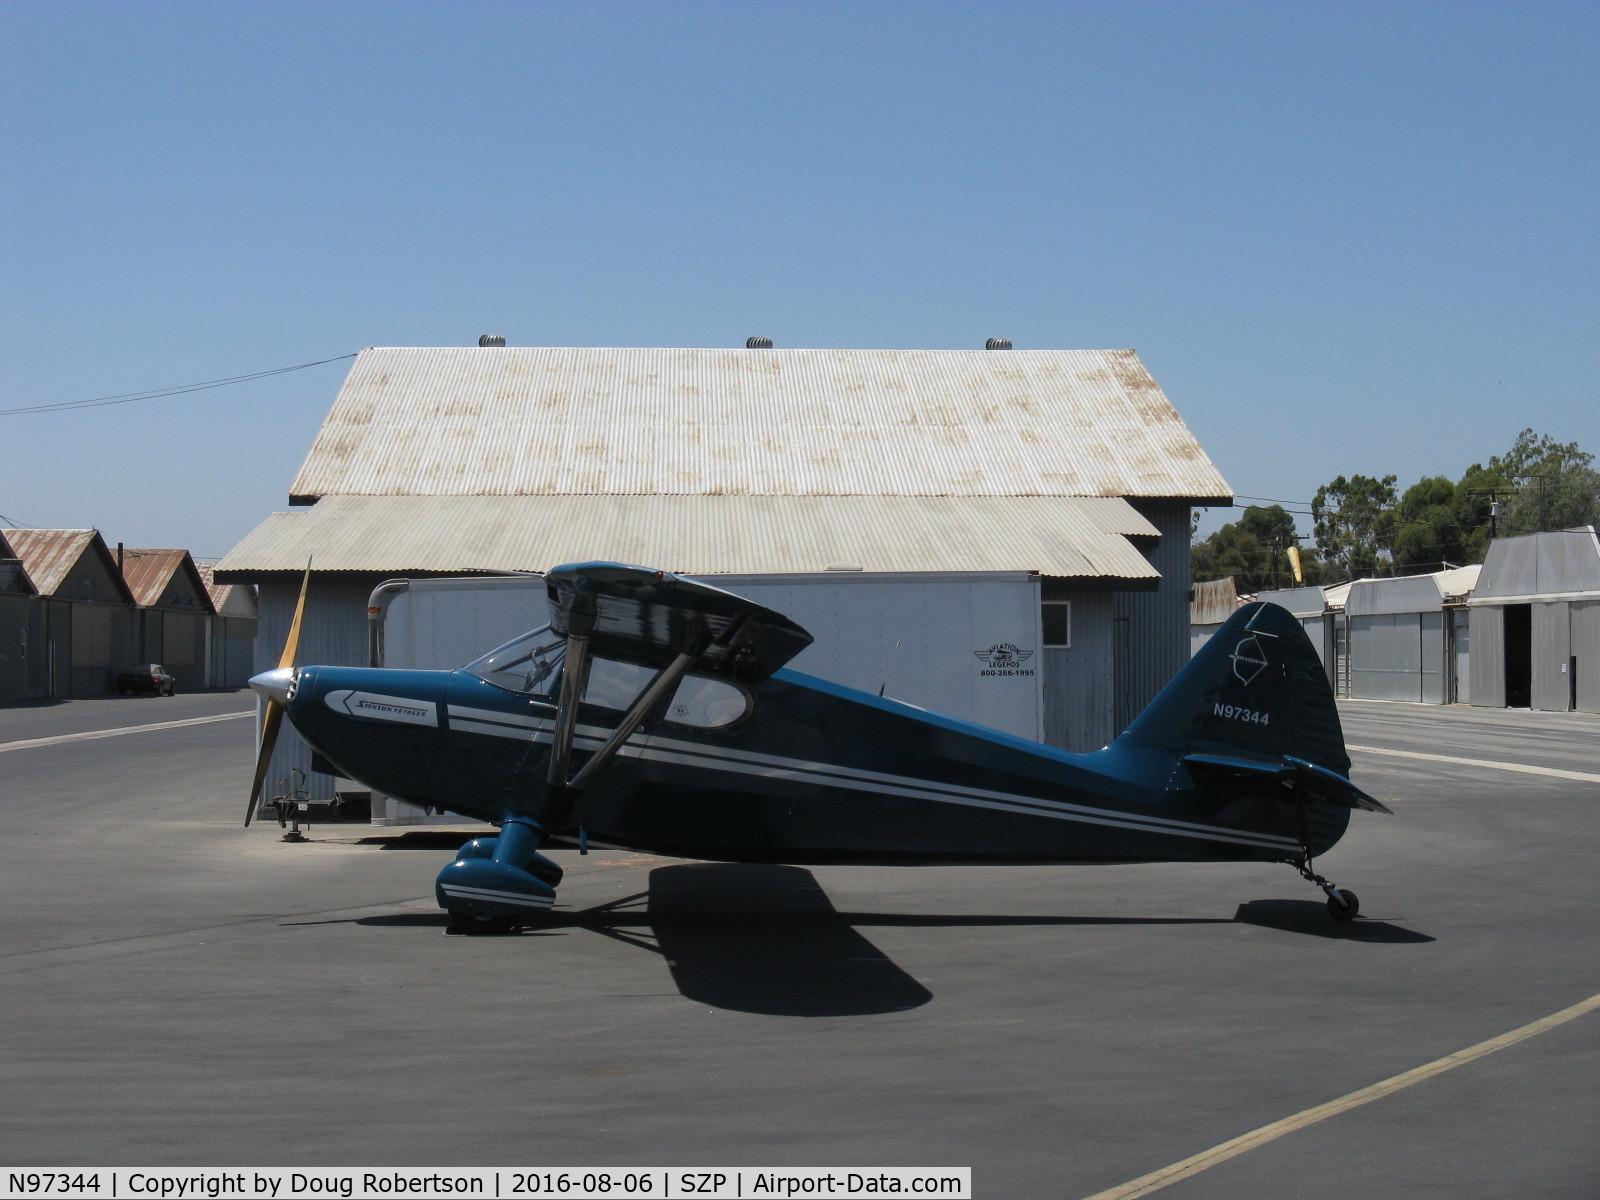 N97344, 1946 Universal Stinson 108 Voyager C/N 108-344, 1946 Universal Stinson 108 VOYAGER, Franklin 6A4165 165 Hp, a stunning apparent re-creation-all looks completely new!